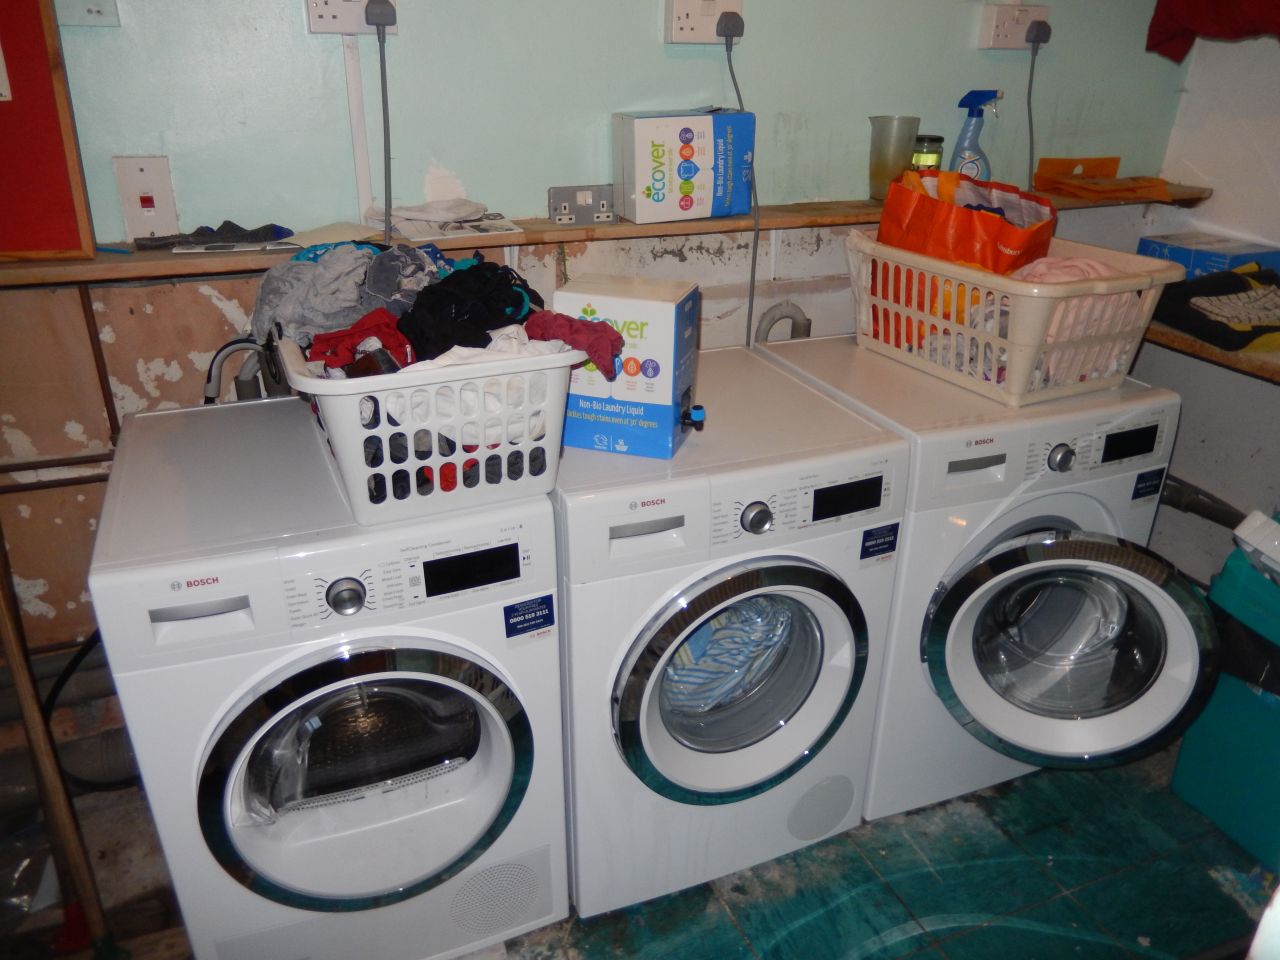 18 residents means a lot of laundry - but at scale the costs are a fraction of a single person's.